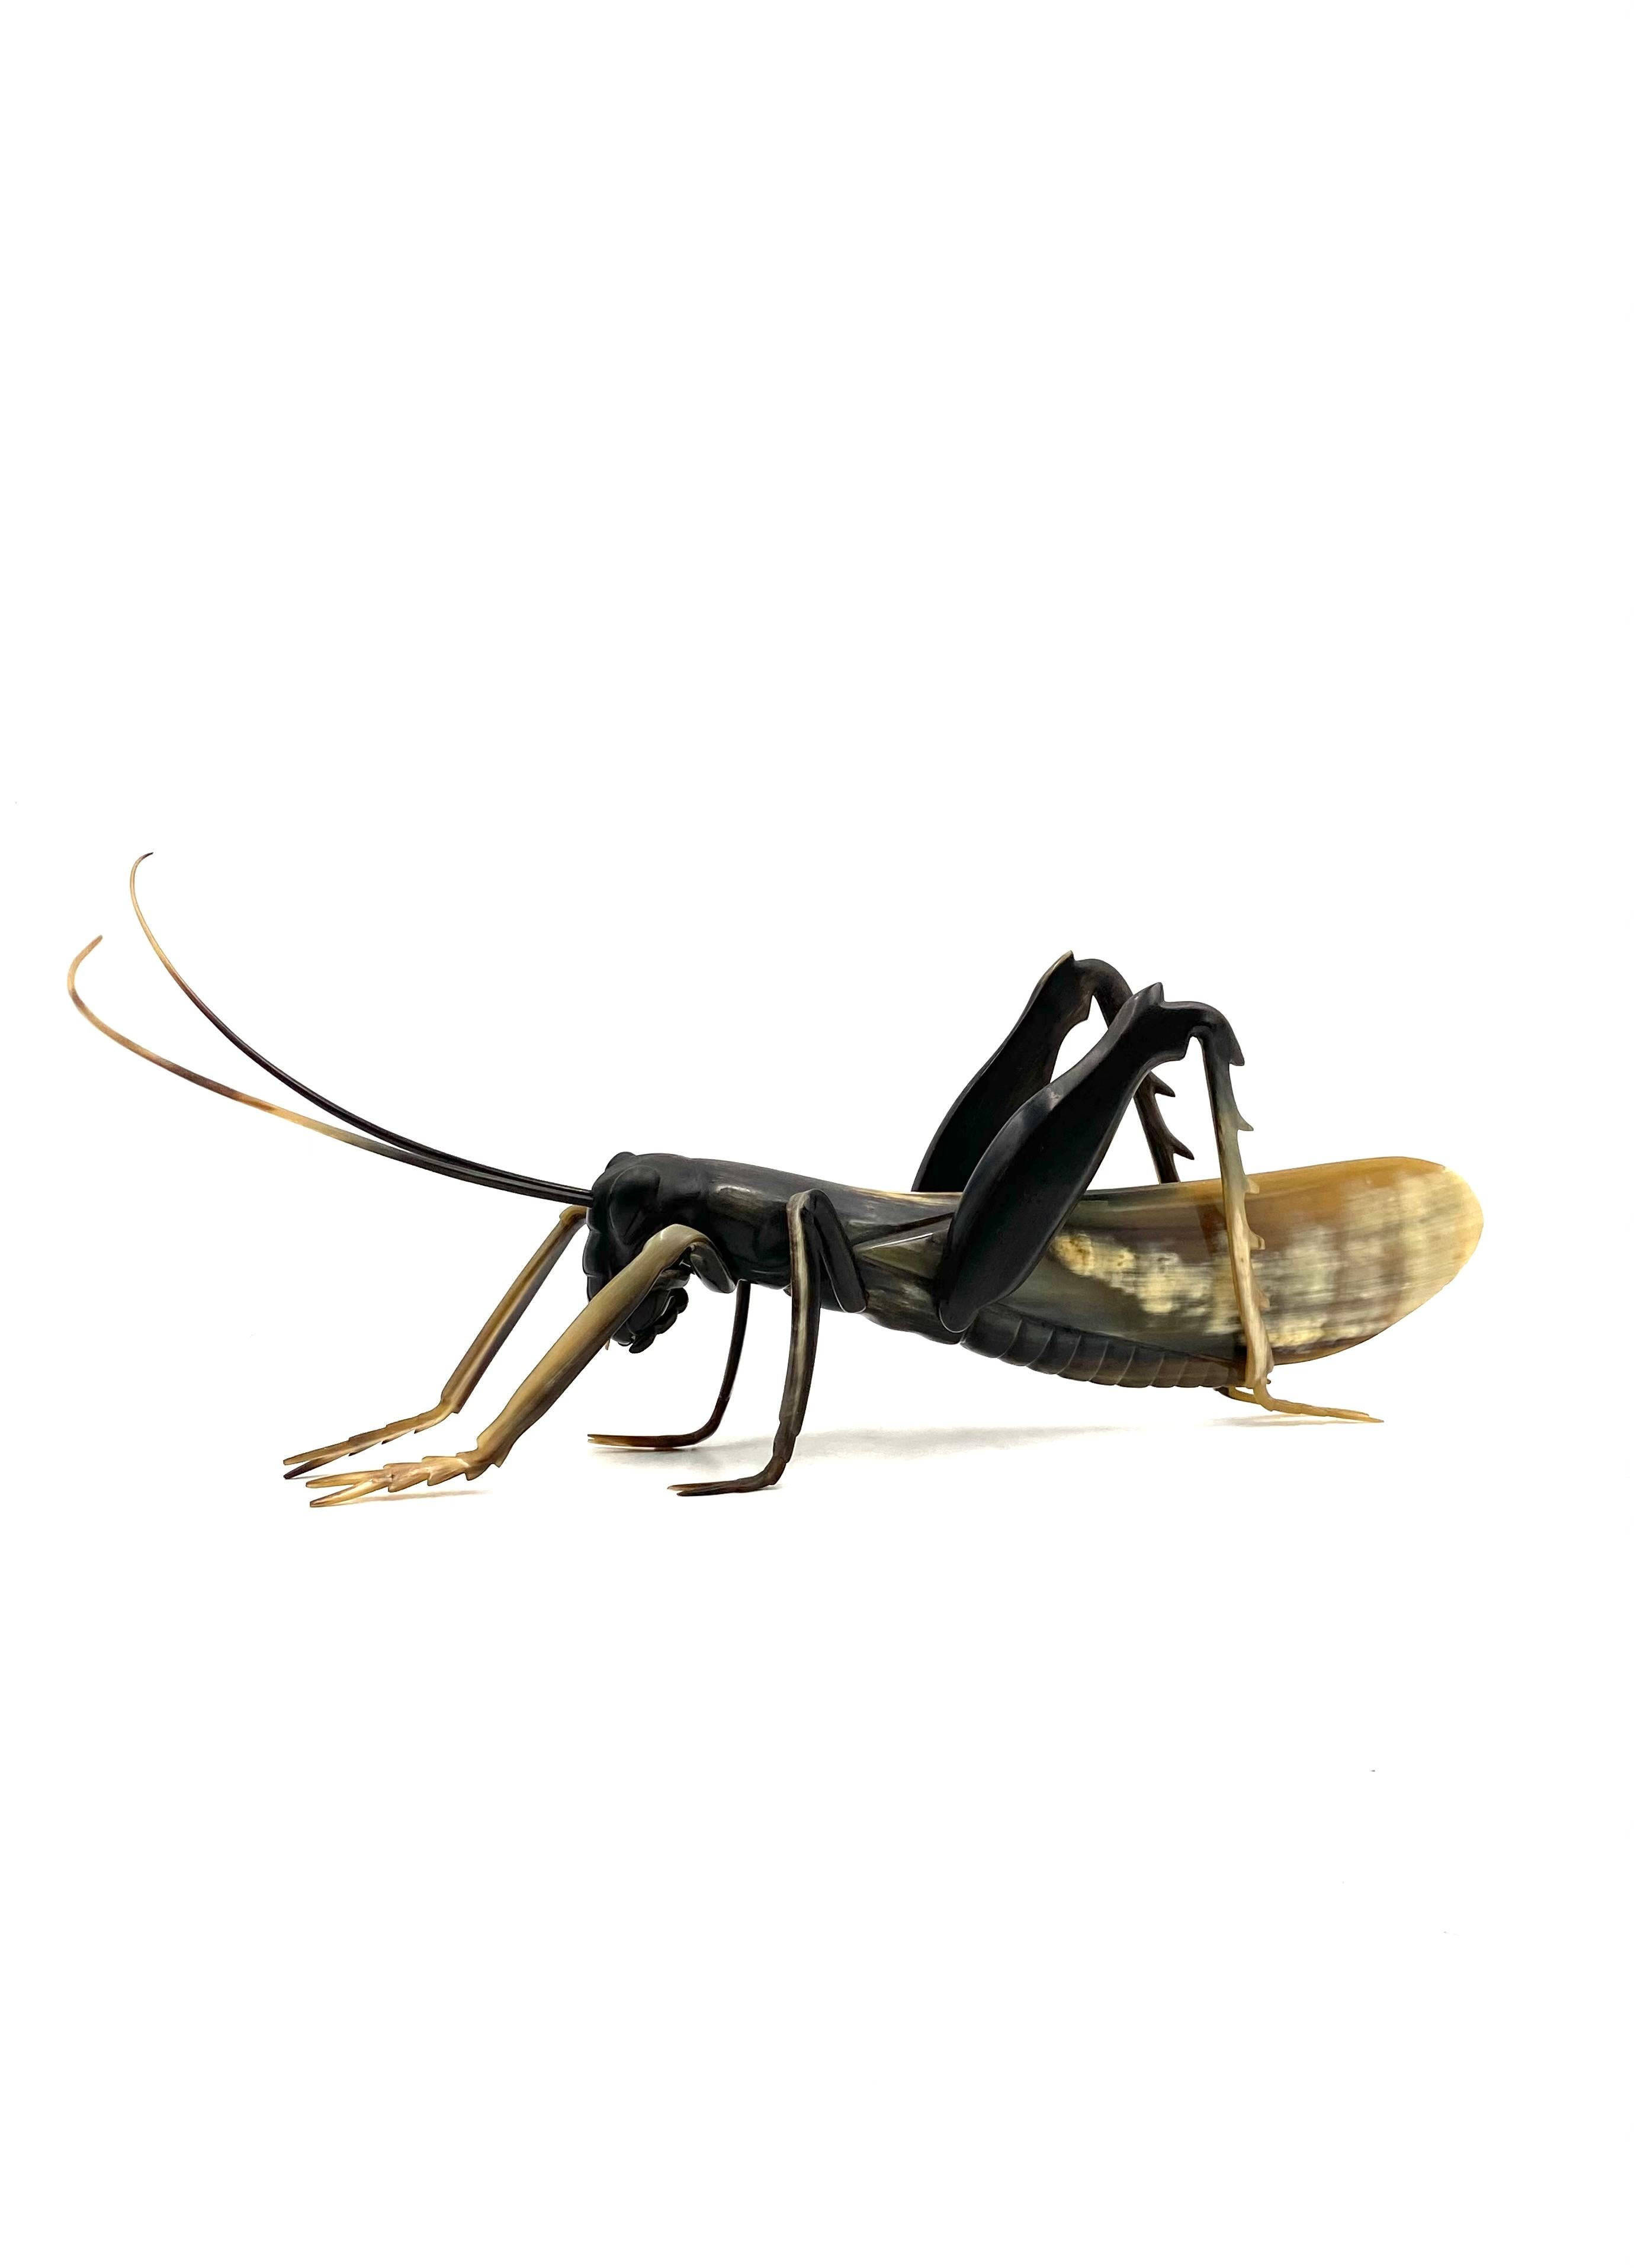 Midcentury Hand-Crafted Horn Grasshopper, France, 1960s For Sale 5